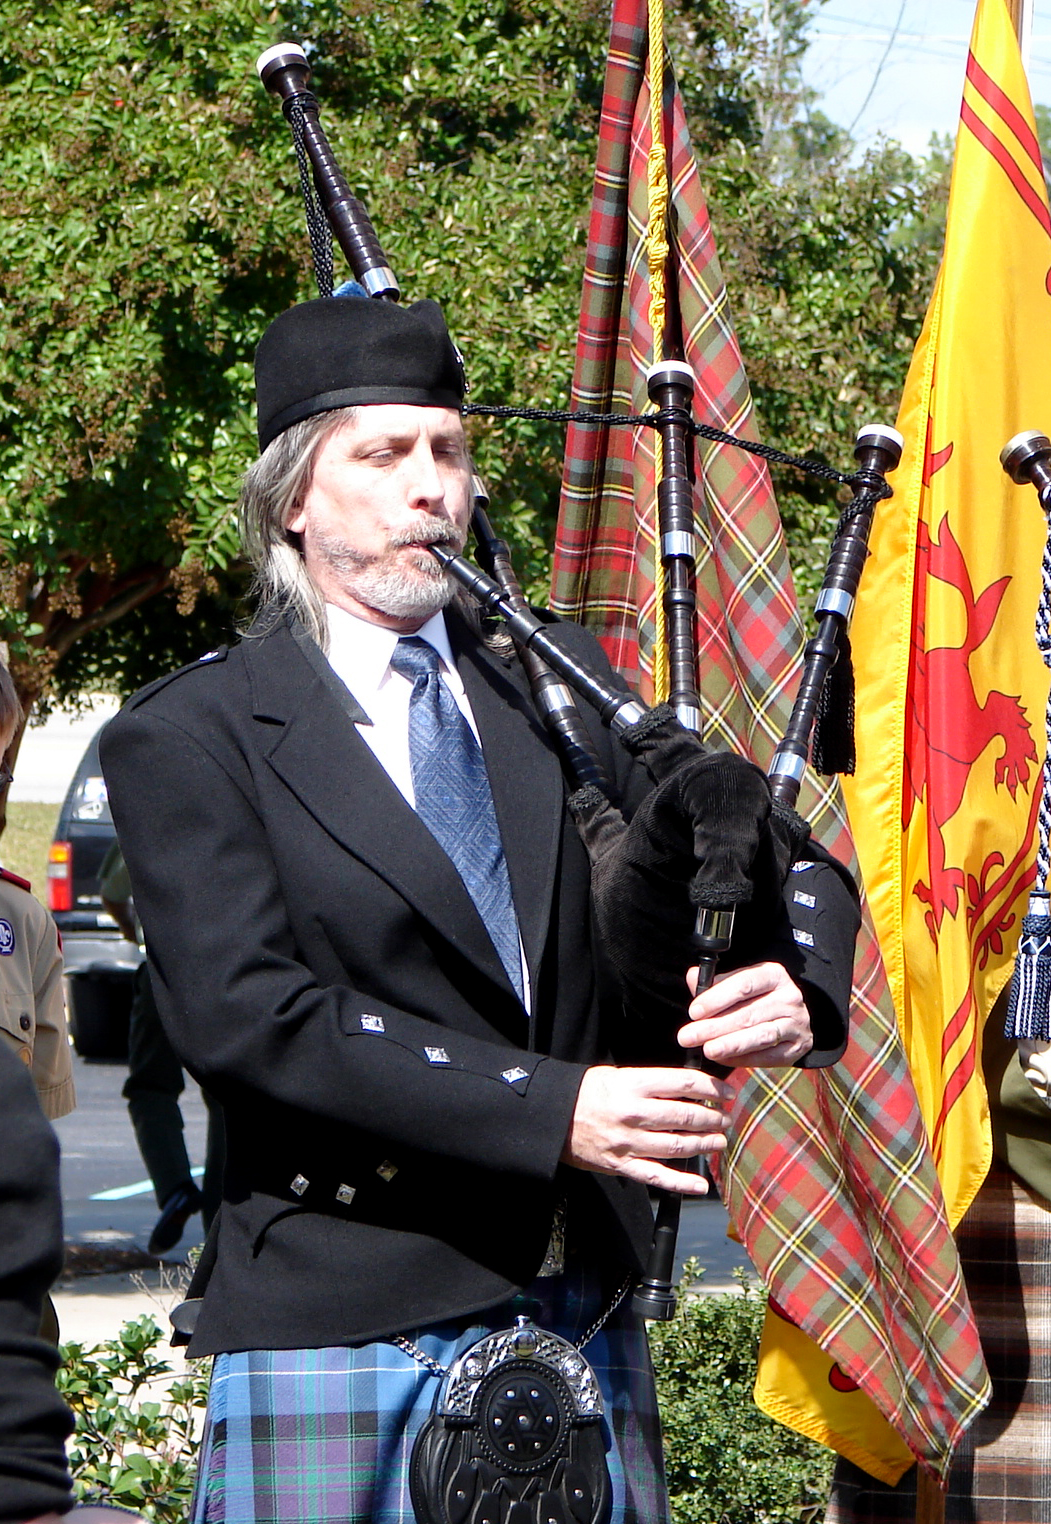 Bagpiper in action